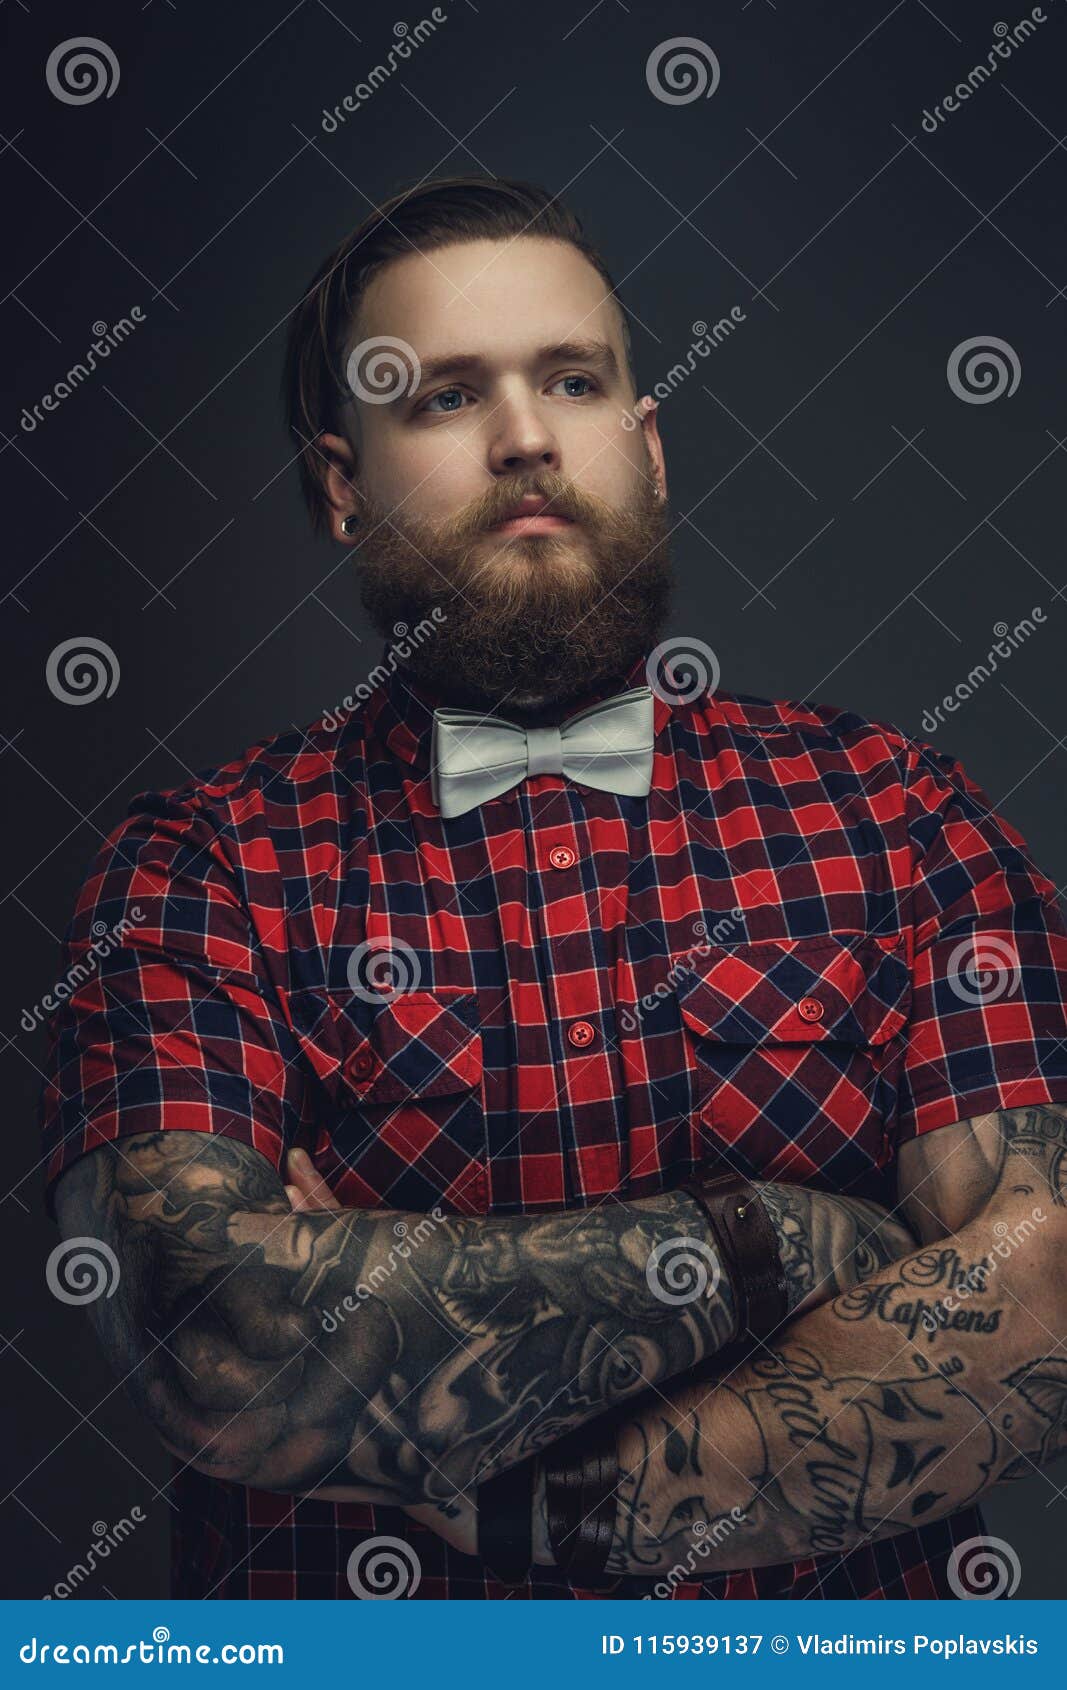 Tattooed Bearded Unformal Male in Red Shirt and Grey Bow Tie. Stock Image - Image of furious, dangerous: 115939137